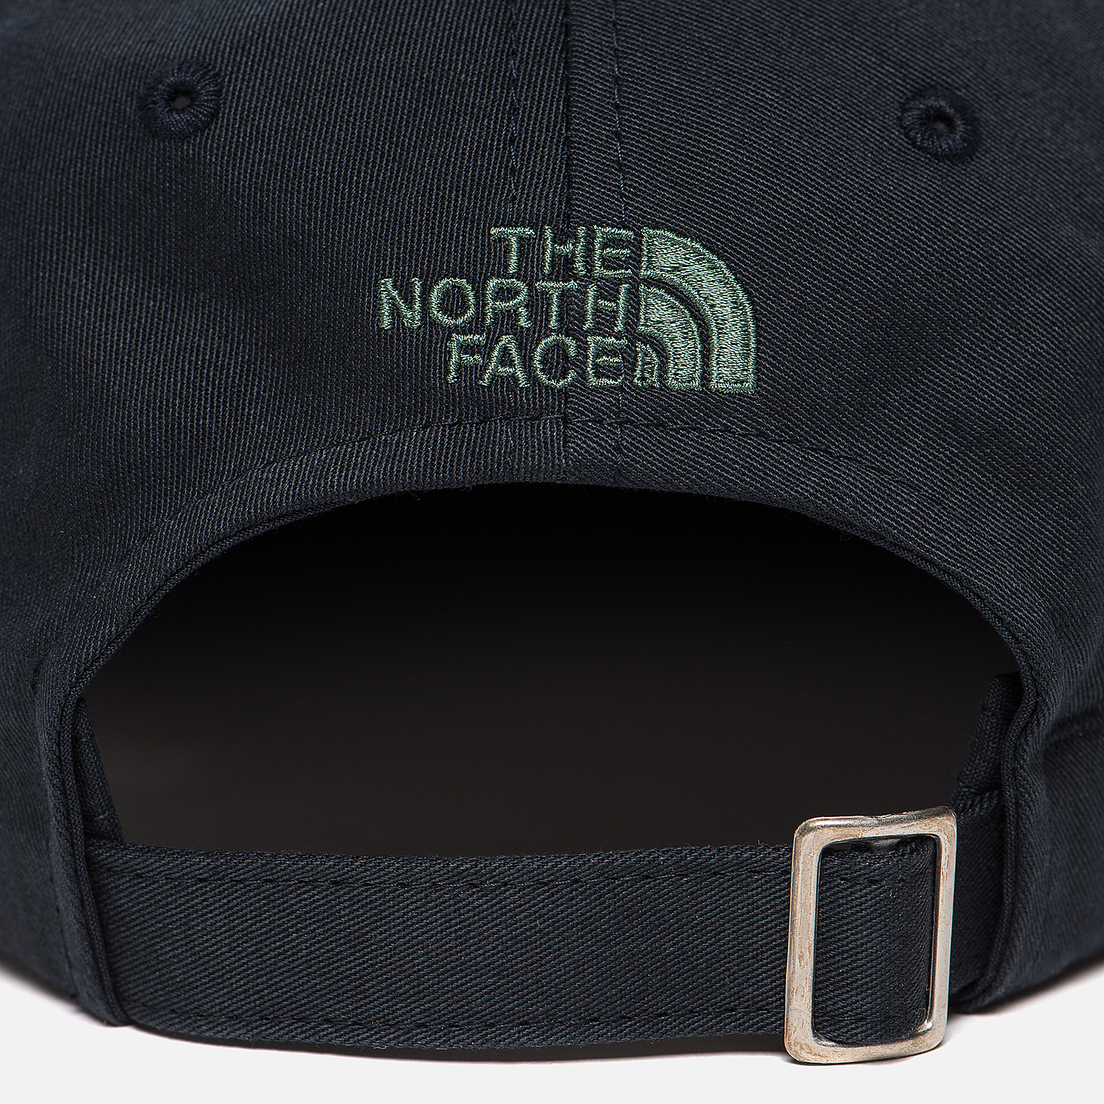 The North Face Кепка The Norm